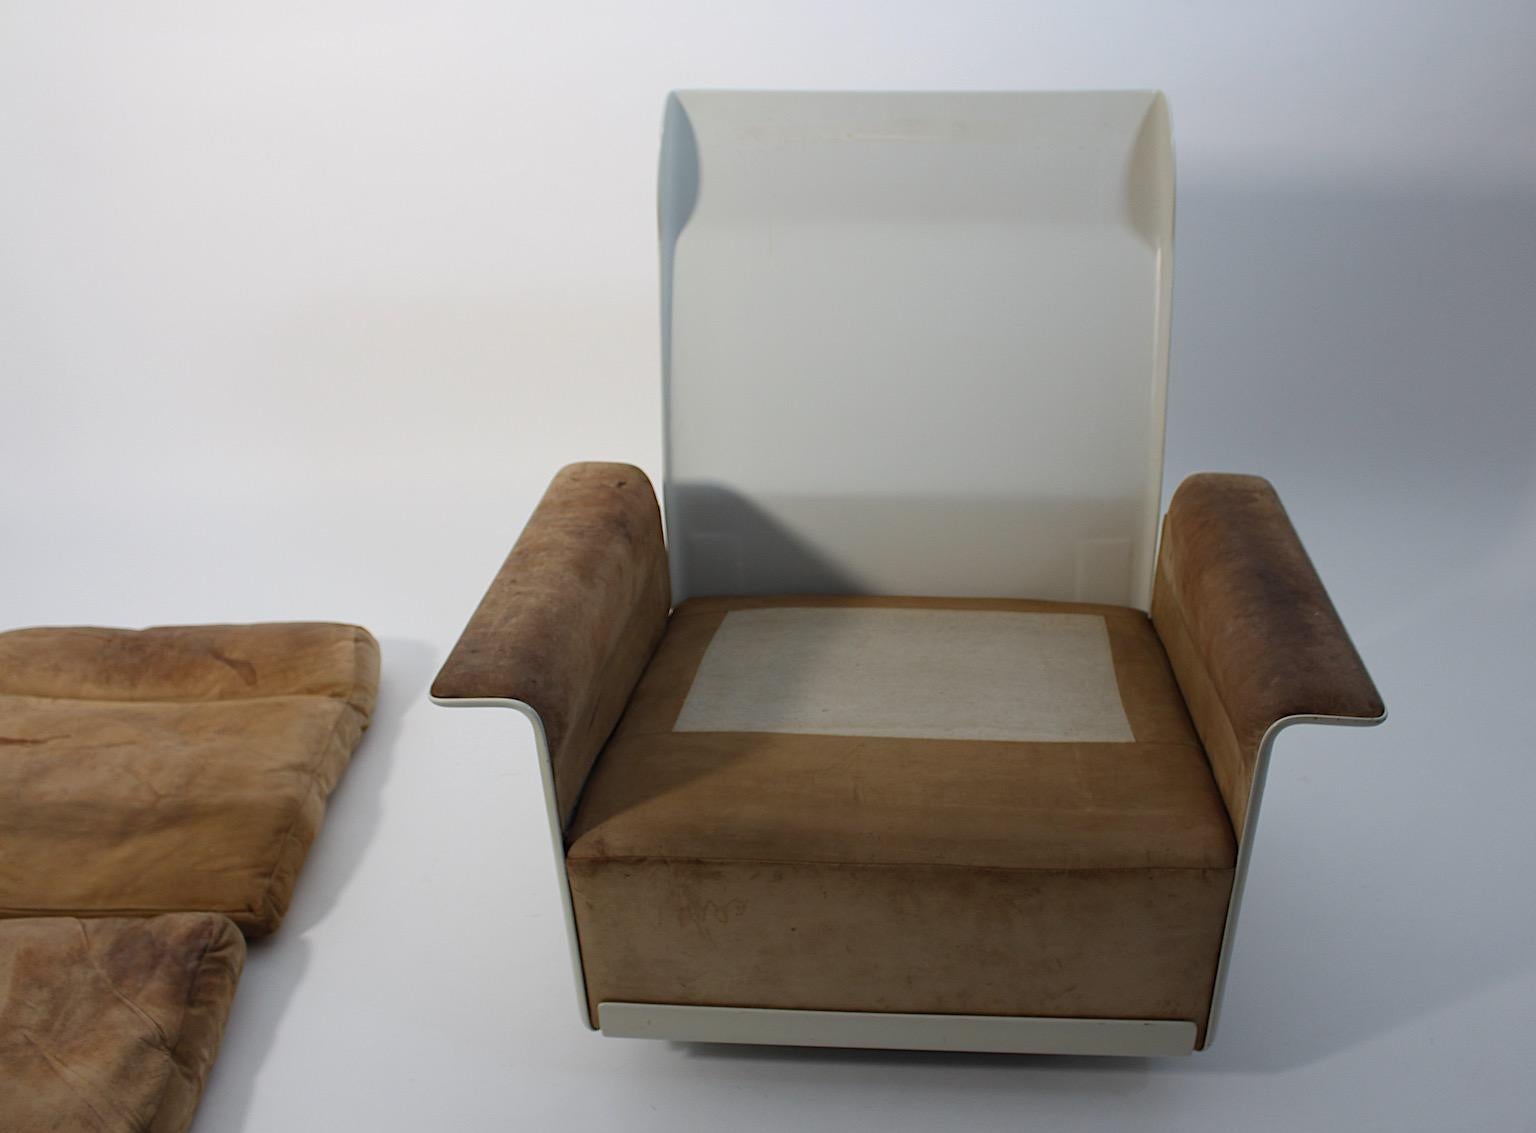 Space Age Vintage Authentic Plastic Lounge Chair Dieter Rams 1960s Germany For Sale 7